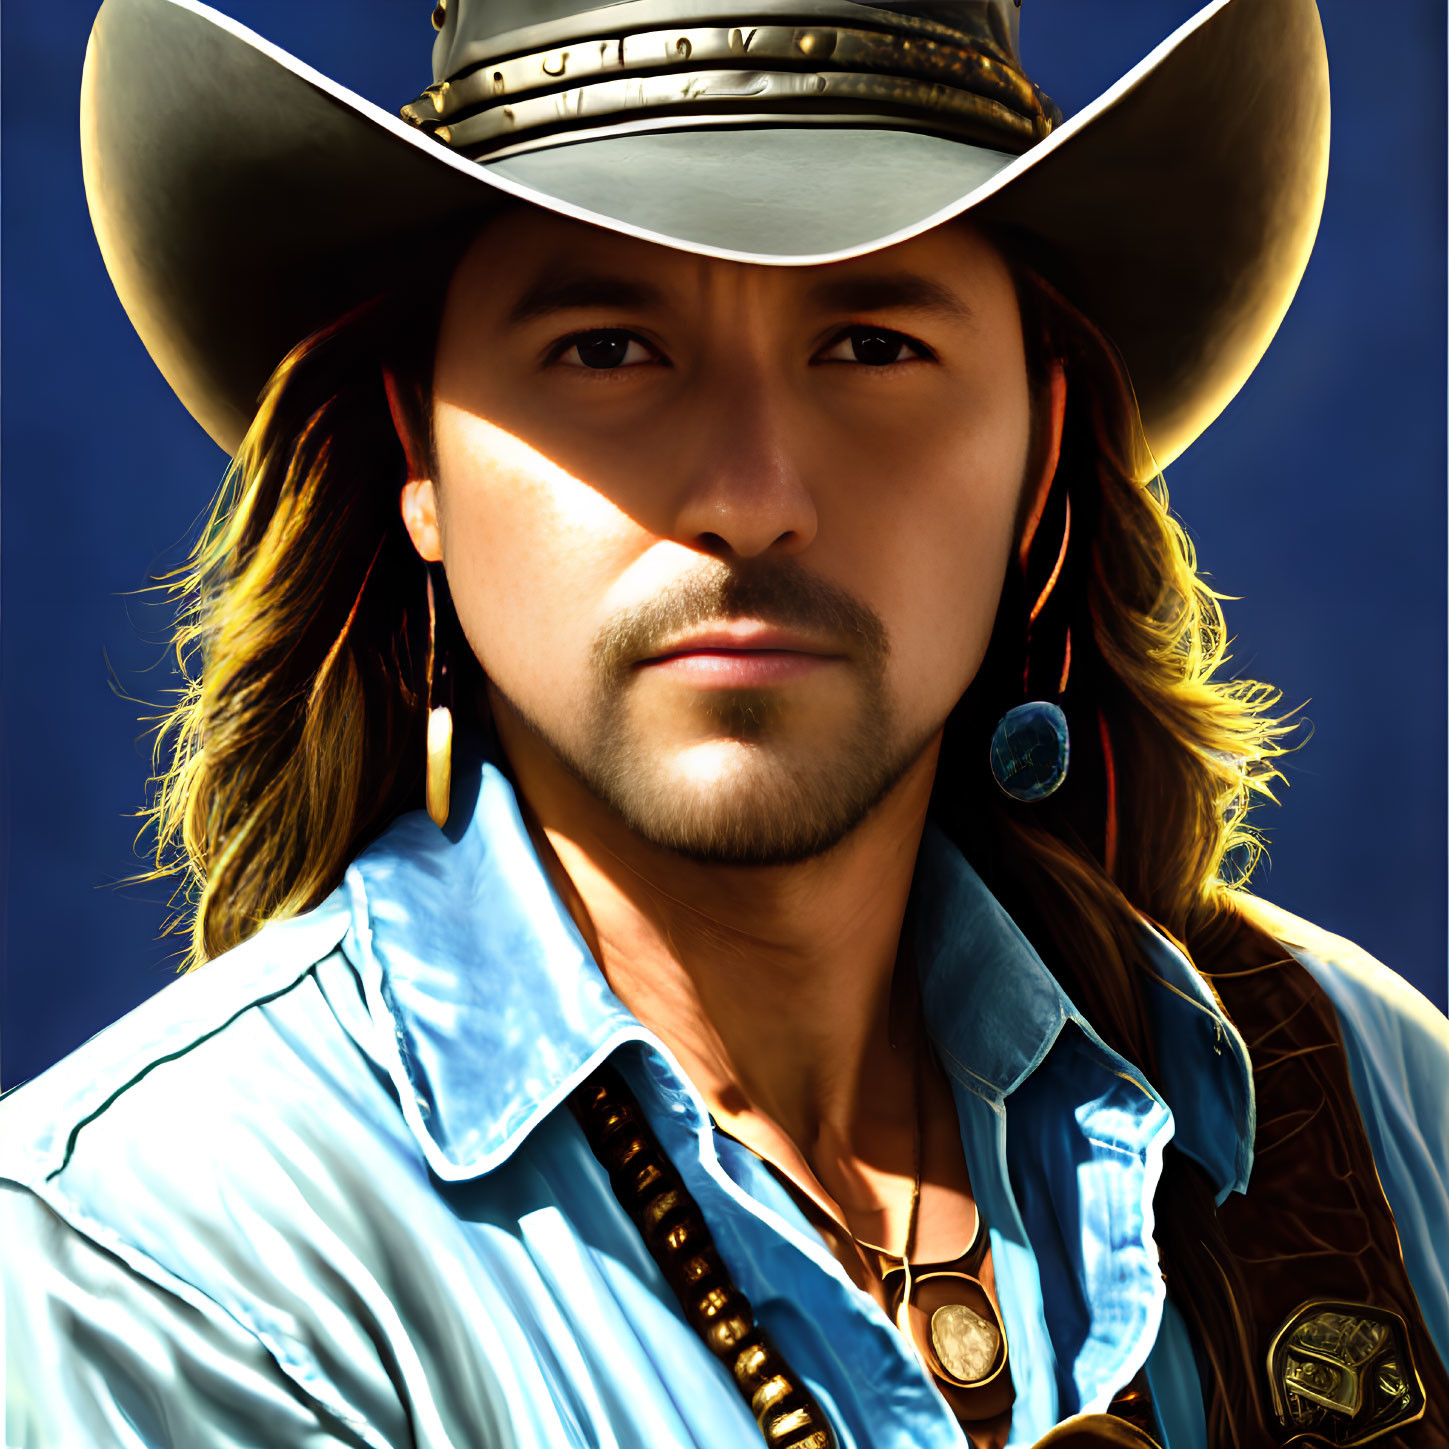 Man in cowboy hat, blue silk shirt, badge, earring, and leather vest embodies western style